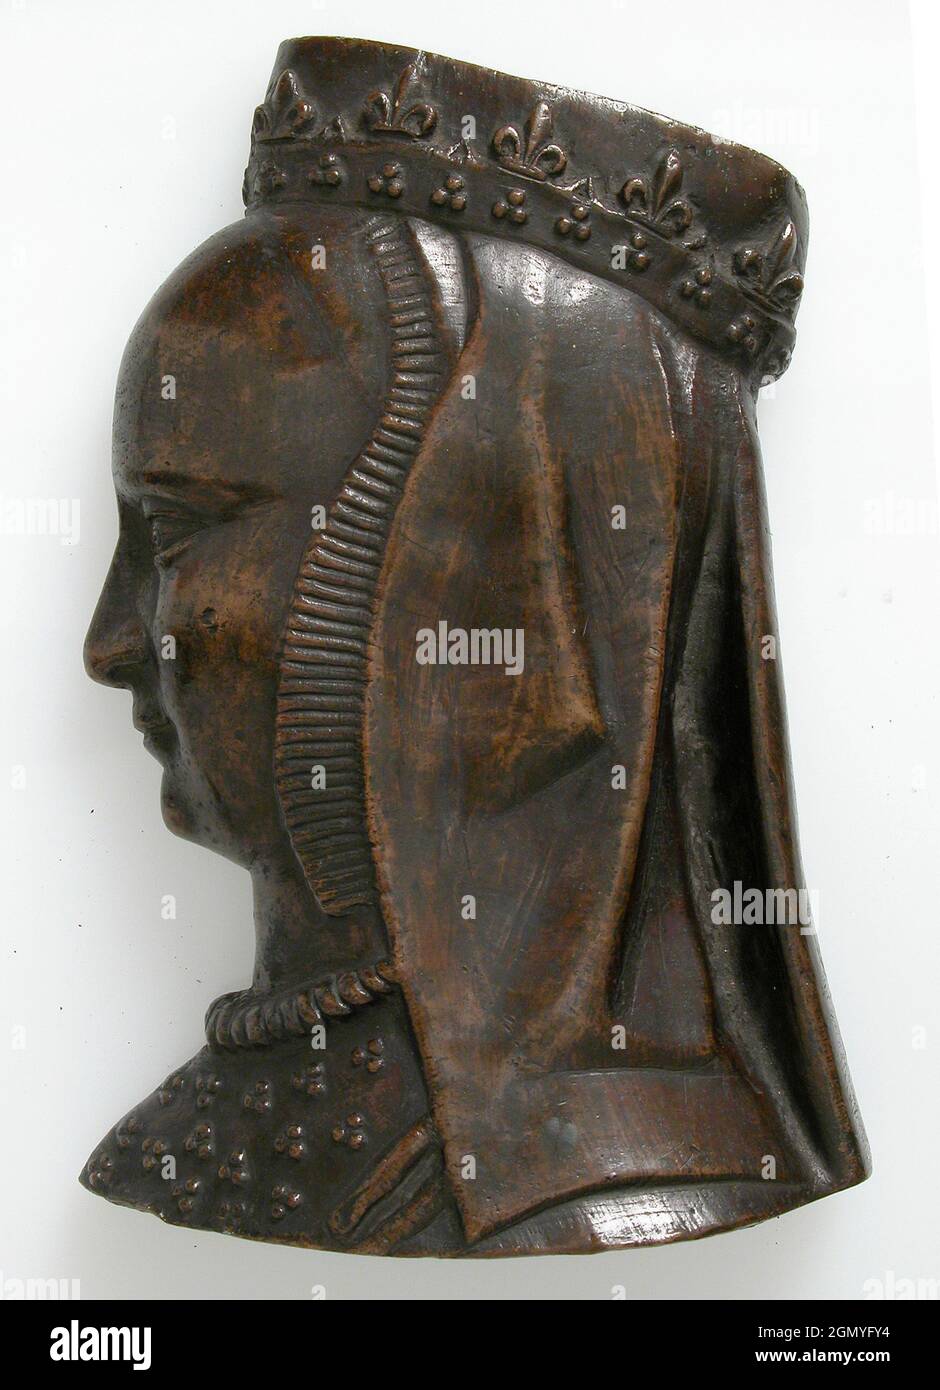 Plaque, Anne of Brittany. Date: 15th century; Culture: French; Medium: Copper alloy; Dimensions: Overall: 9 9/16 x 6 9/16 x 2 7/16 in. (24.3 x 16.6 x Stock Photo